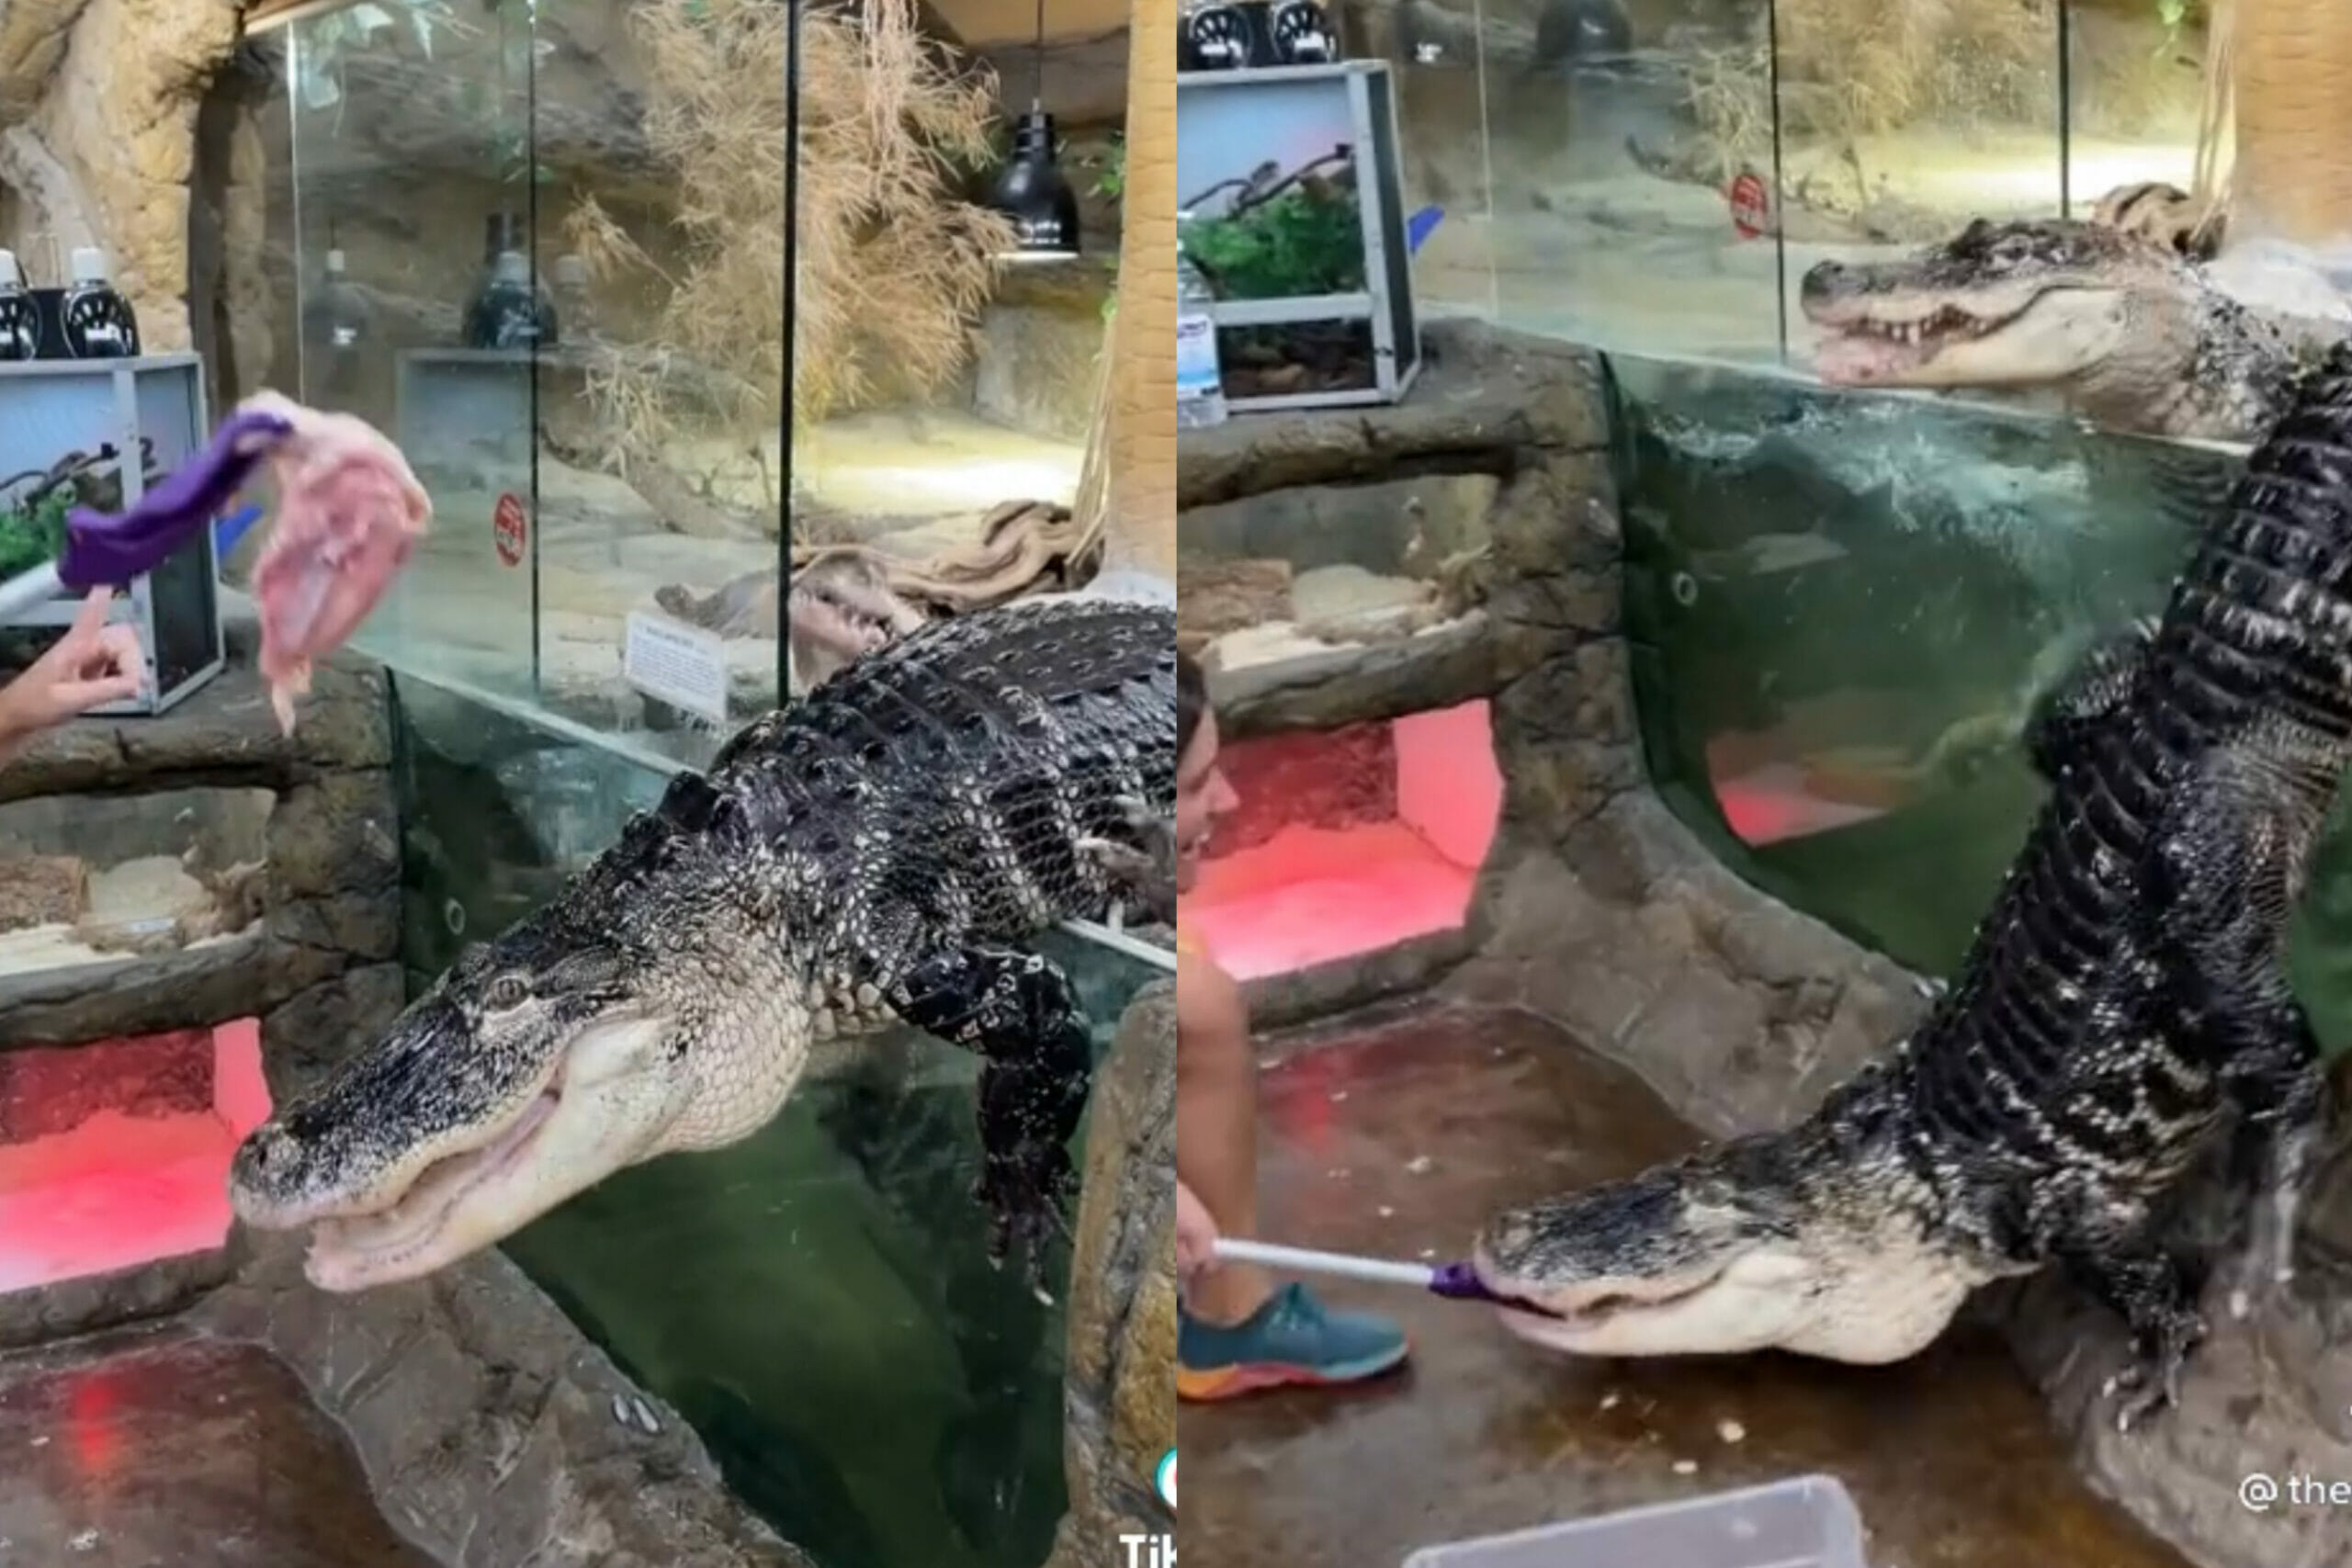 Screenshots of a viral TikTok video where an alligator escapes its enclosure at dinner time